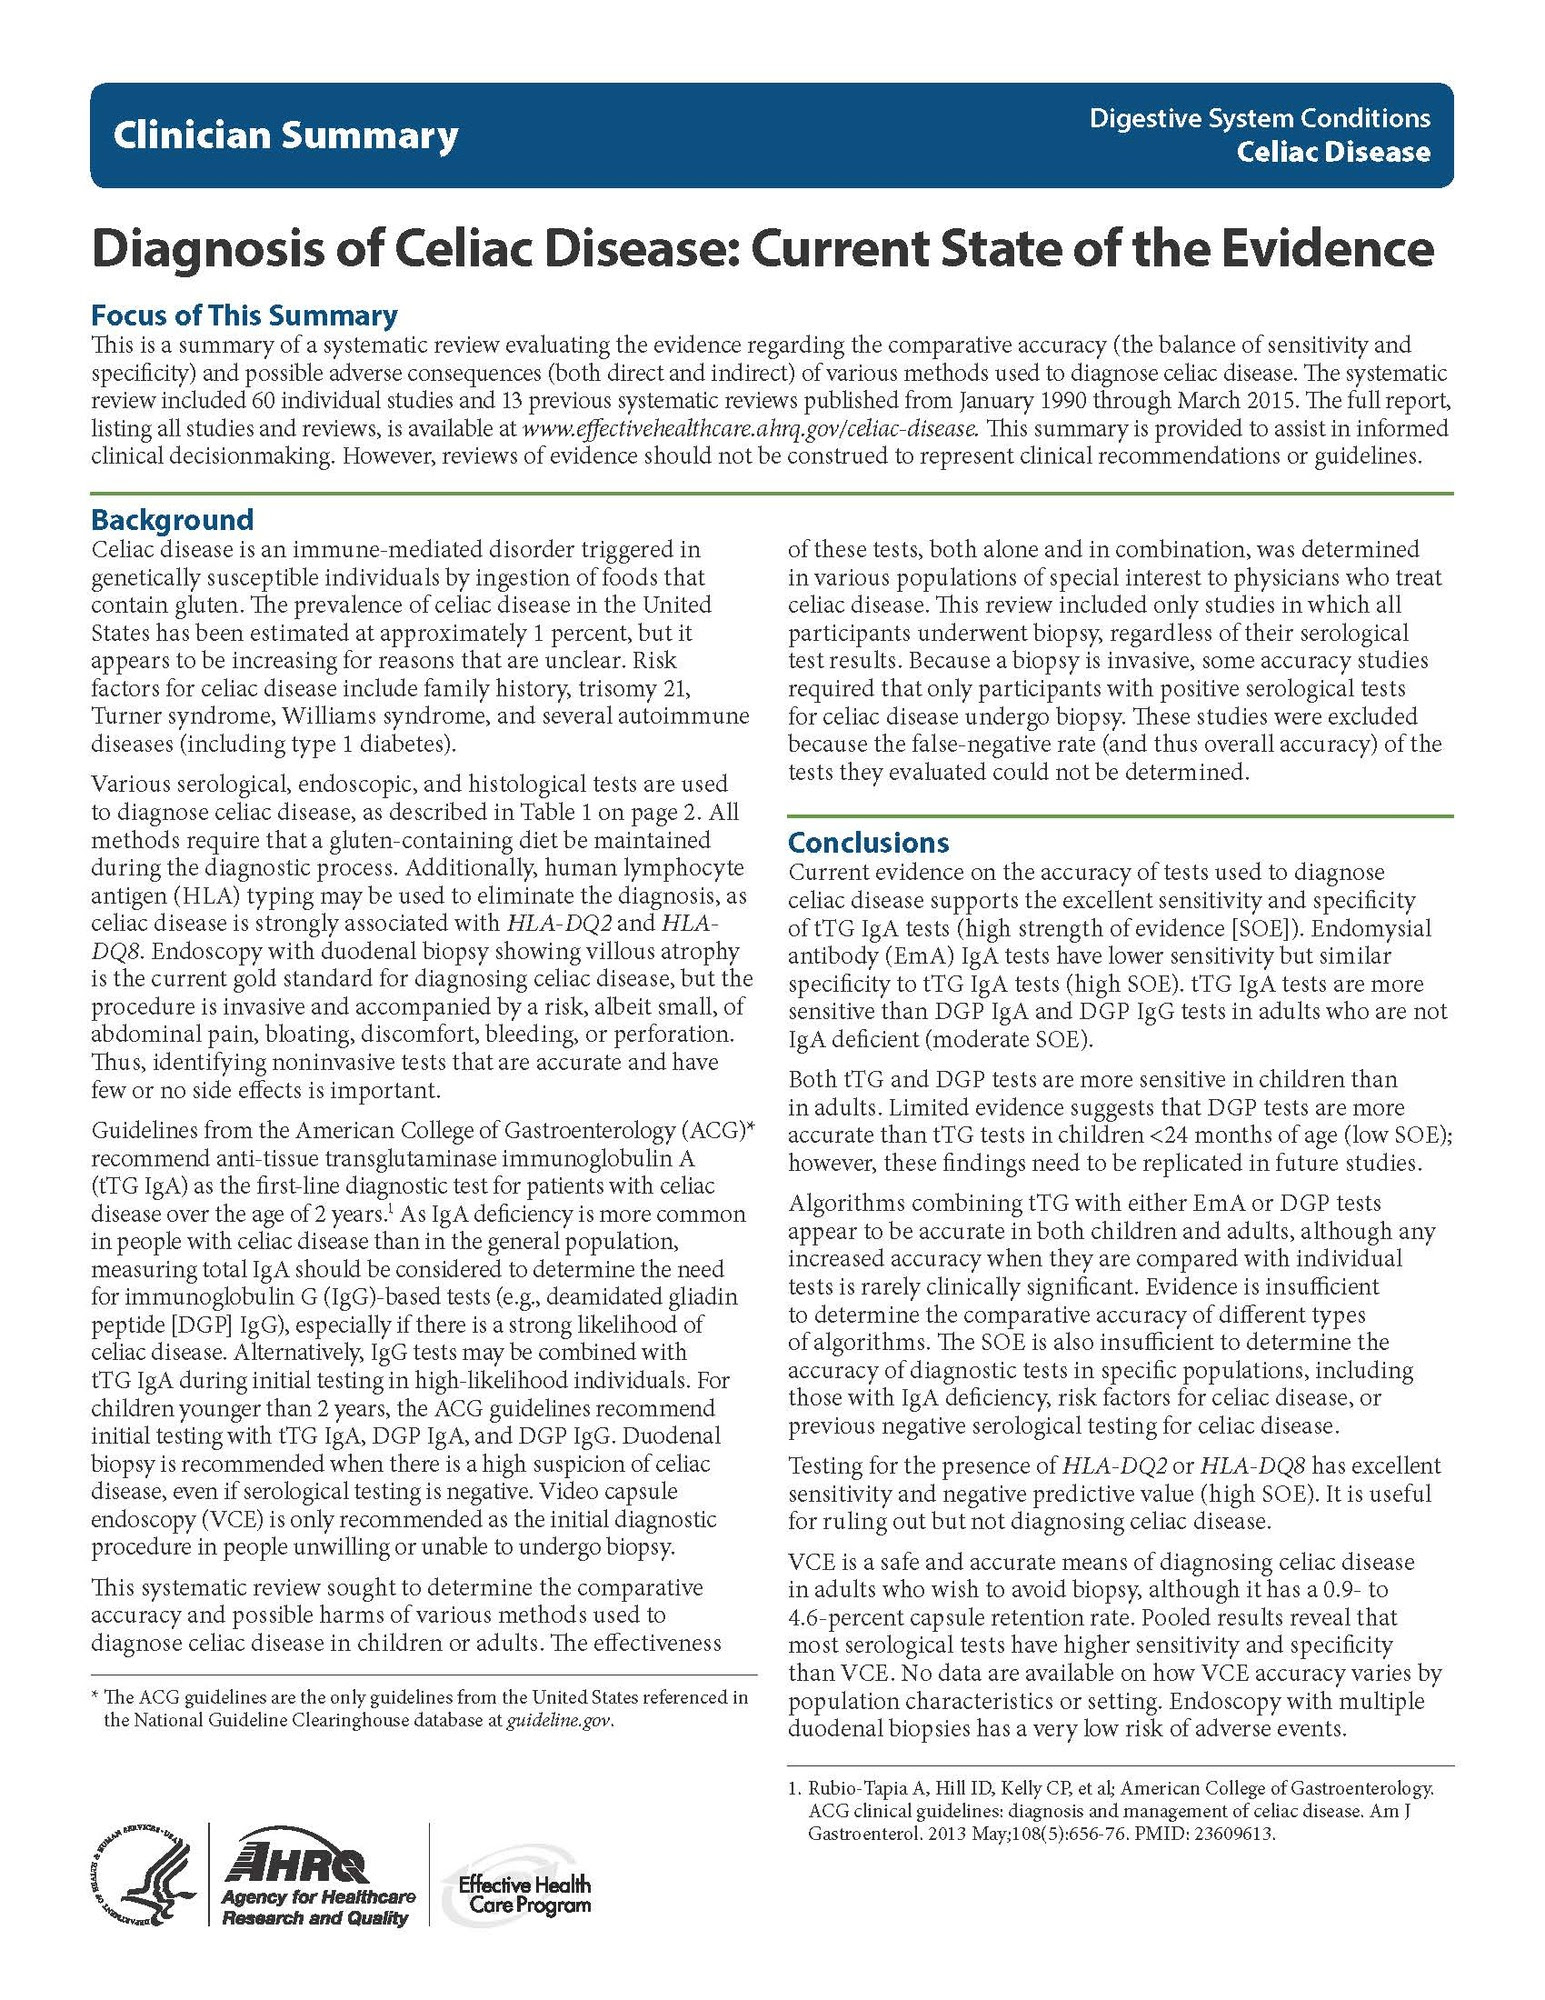 AHRQ Publication Summarizes the Current State of Evidence Related to the Diagnosis of Celiac Disease